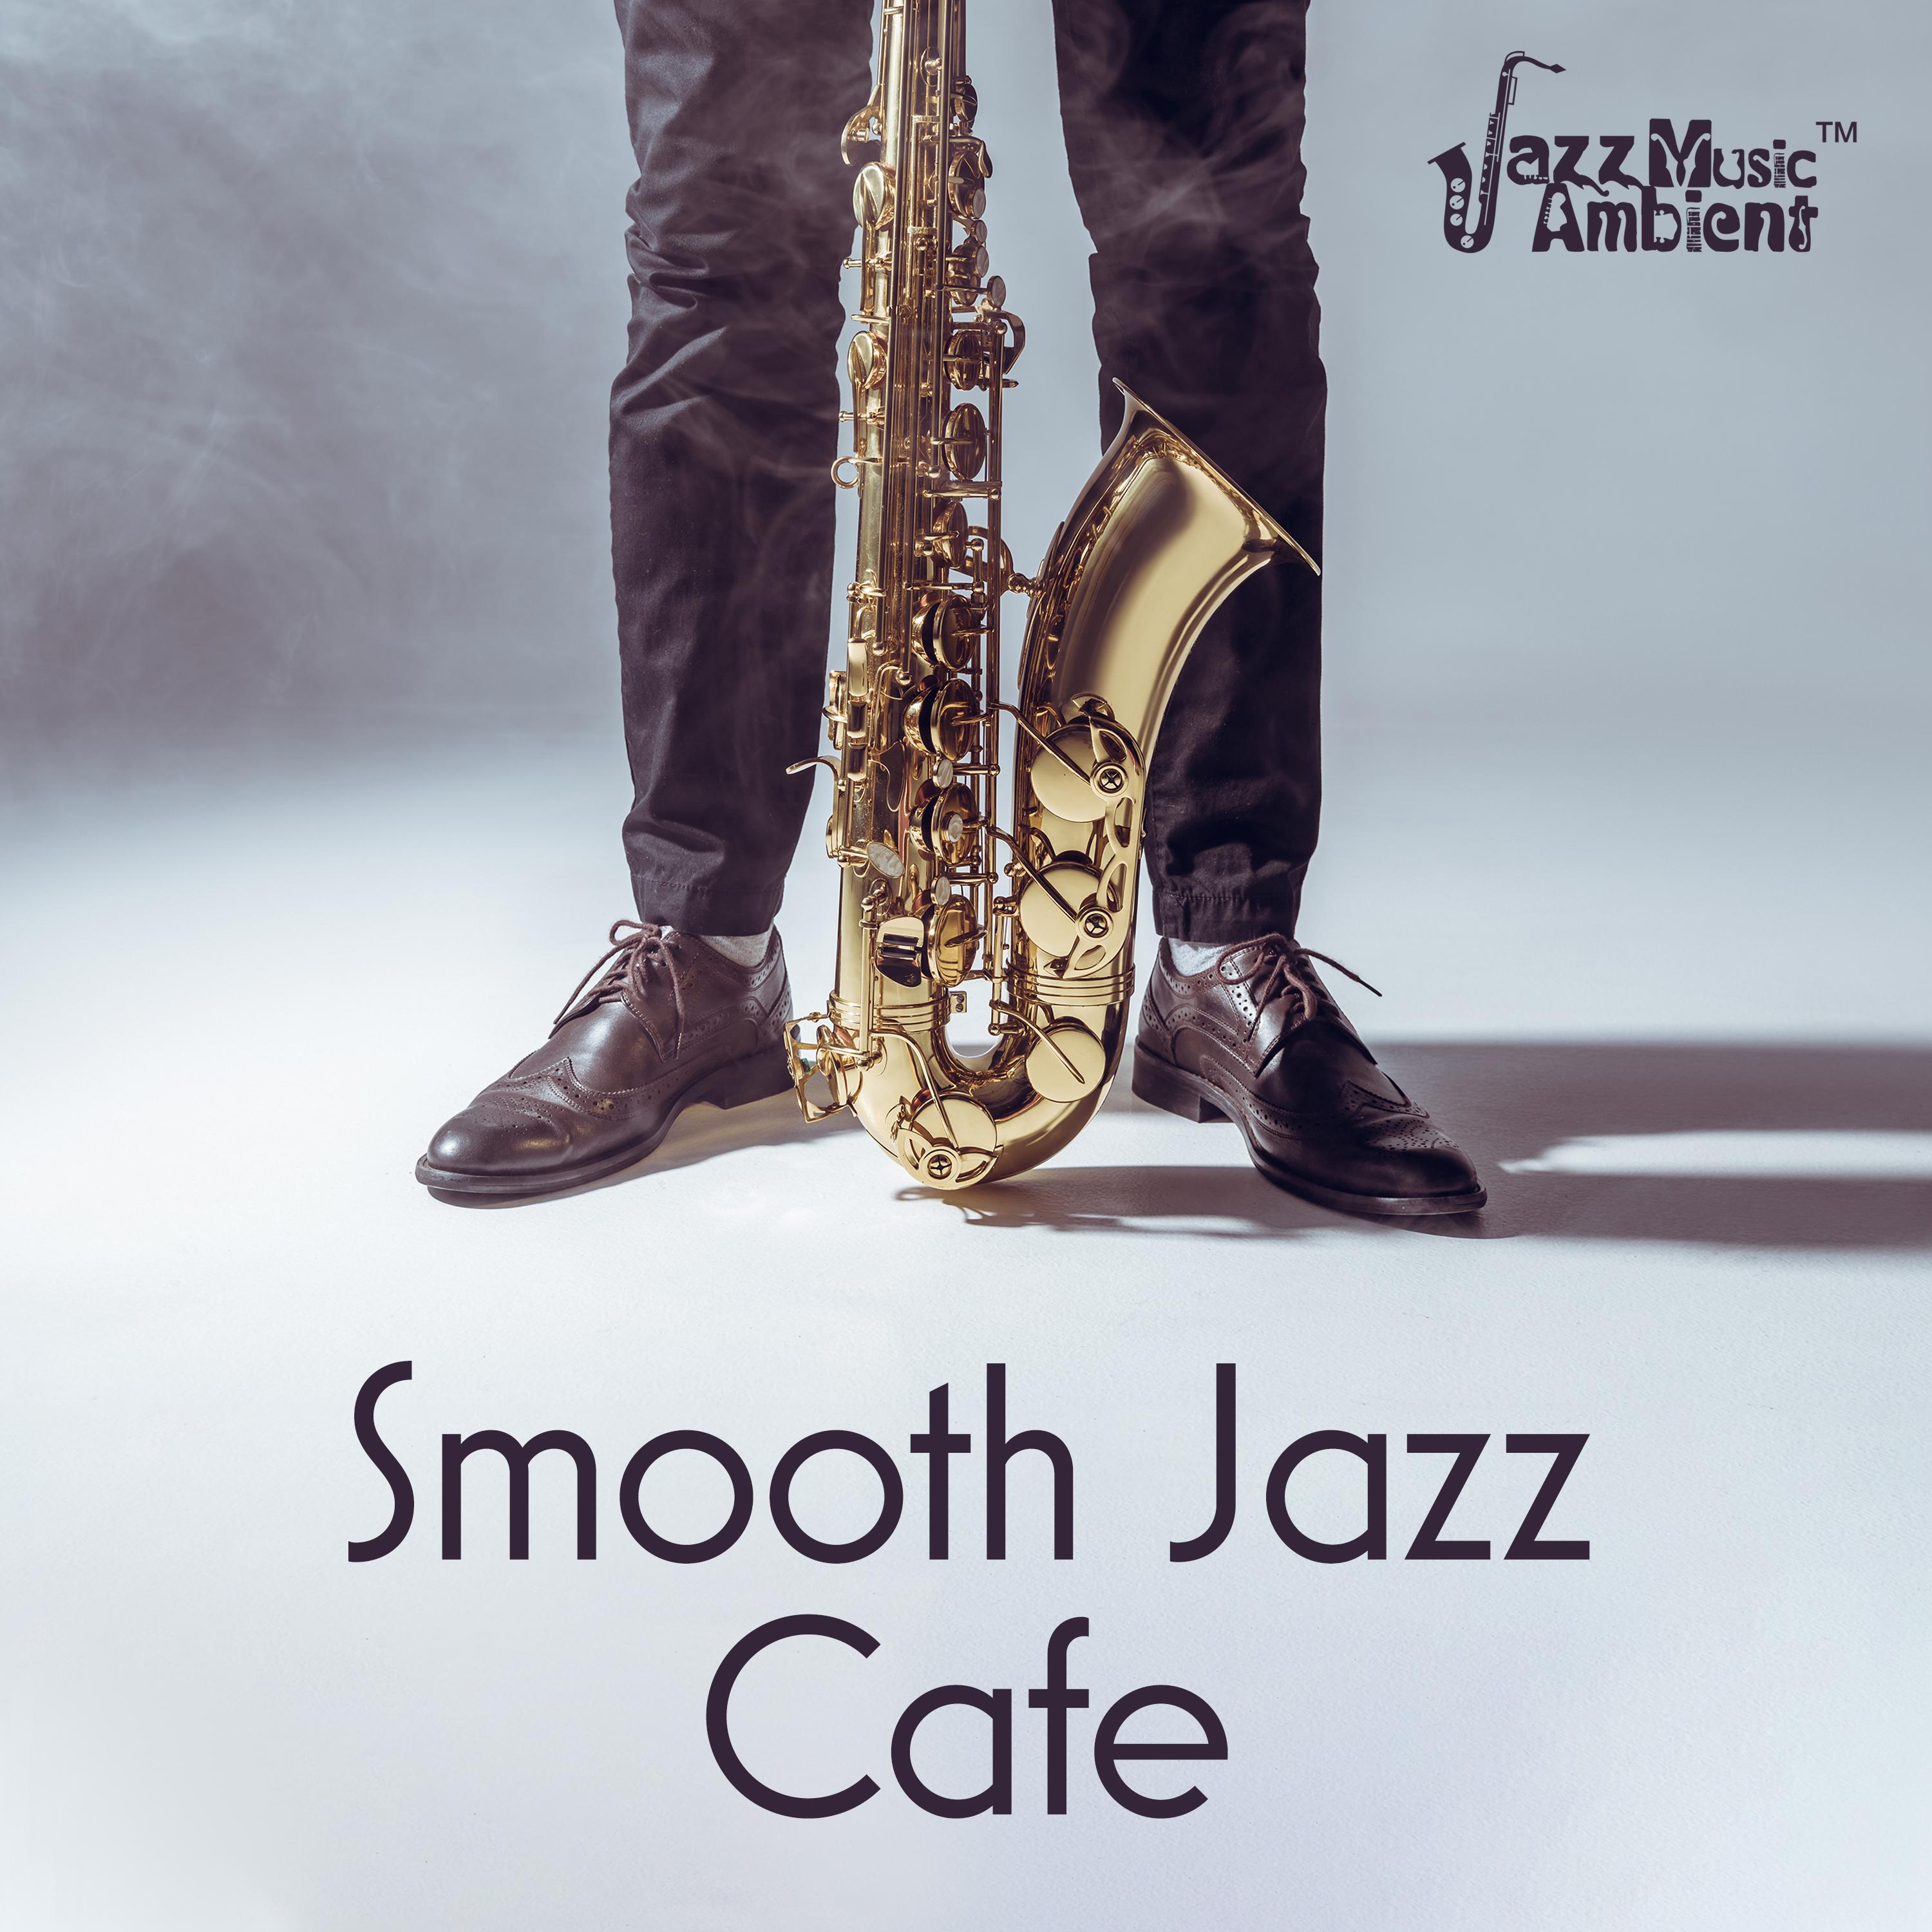 Smooth Jazz Cafe (Cozy Atmosphere, Winter Celebration, Beautiful Jazz Notes, Relaxing Time, Midnight Cocktails, Elegance Jazz Instrumental Music, Smooth Mood)